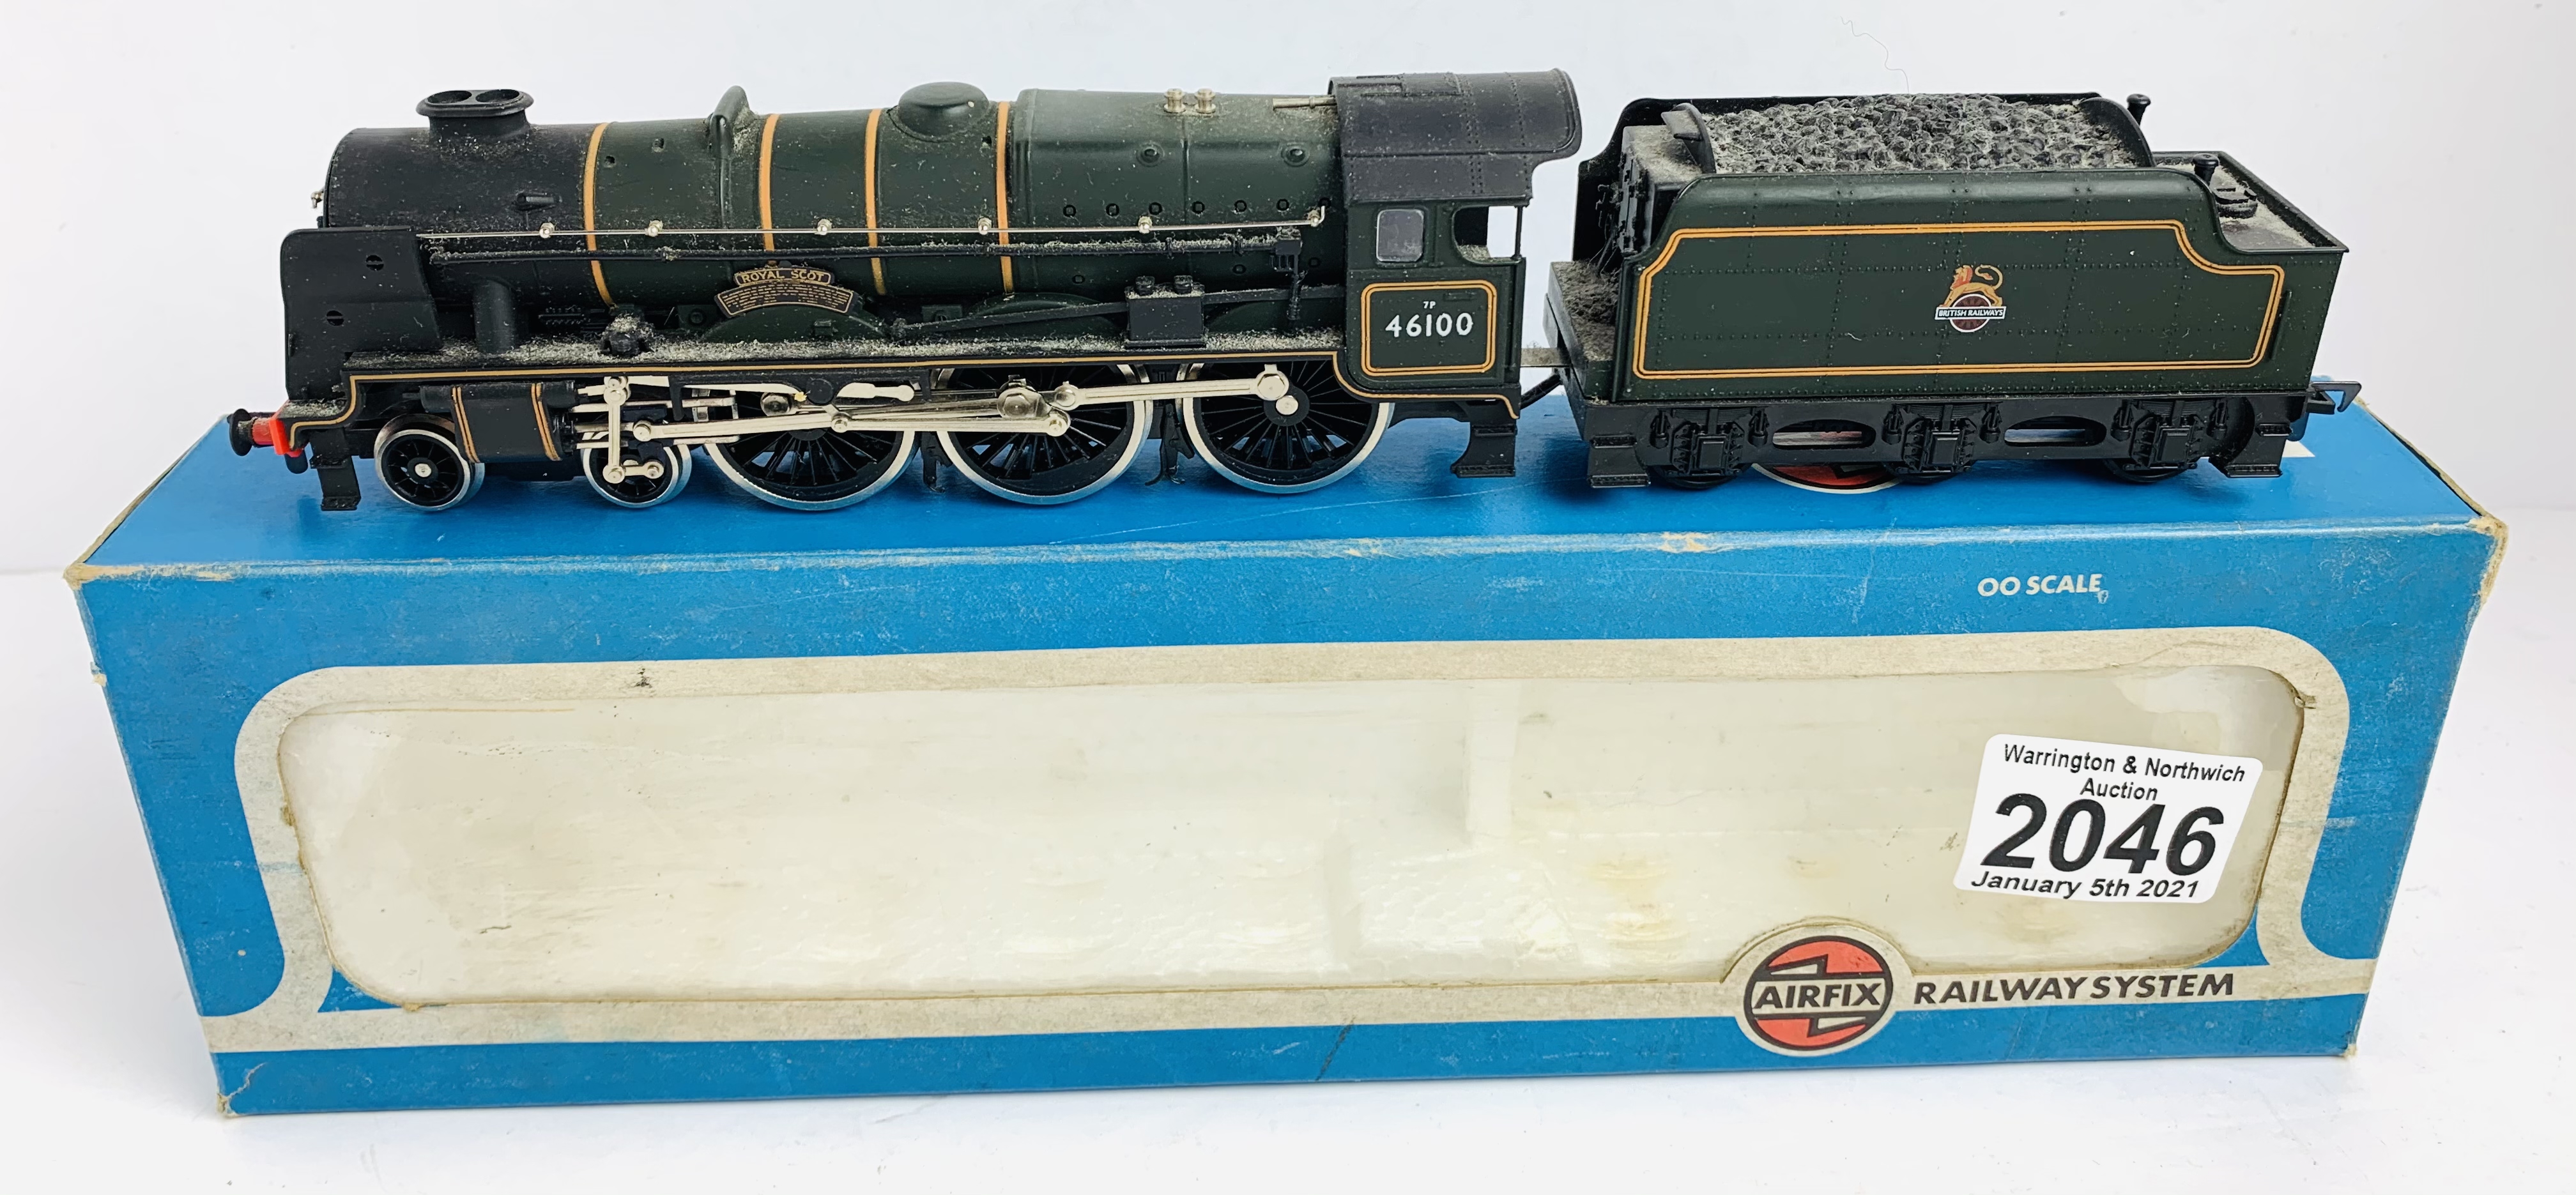 Airfix OO Gauge Royal Scot Locomotive Boxed P&P Group 1 (£14+VAT for the first lot and £1+VAT for